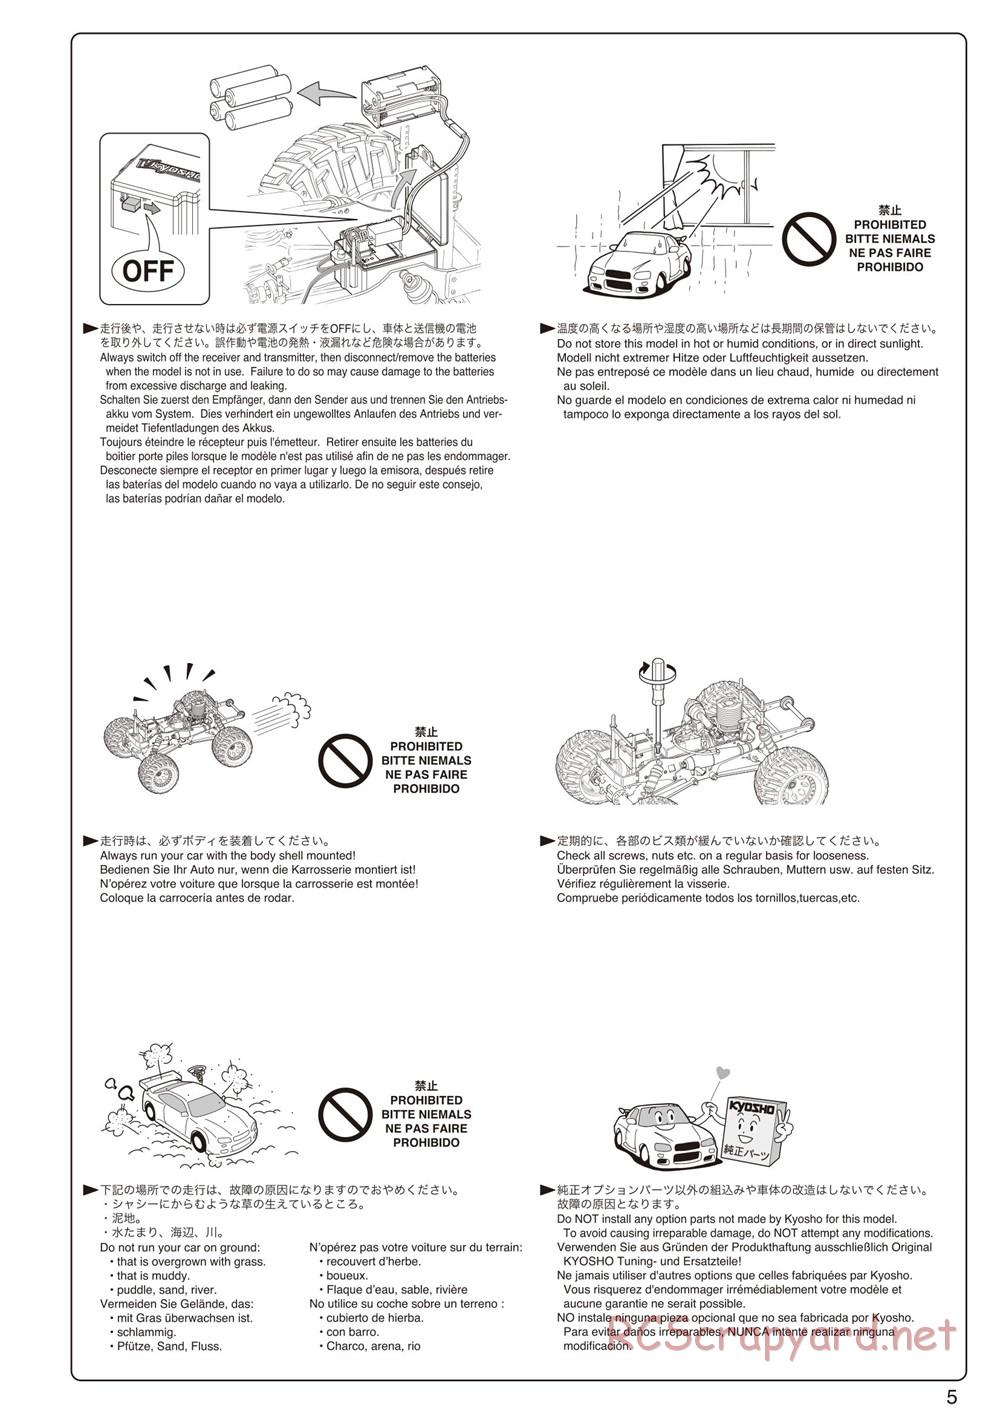 Kyosho - Mad Force Kruiser 2.0 - Manual - Page 5